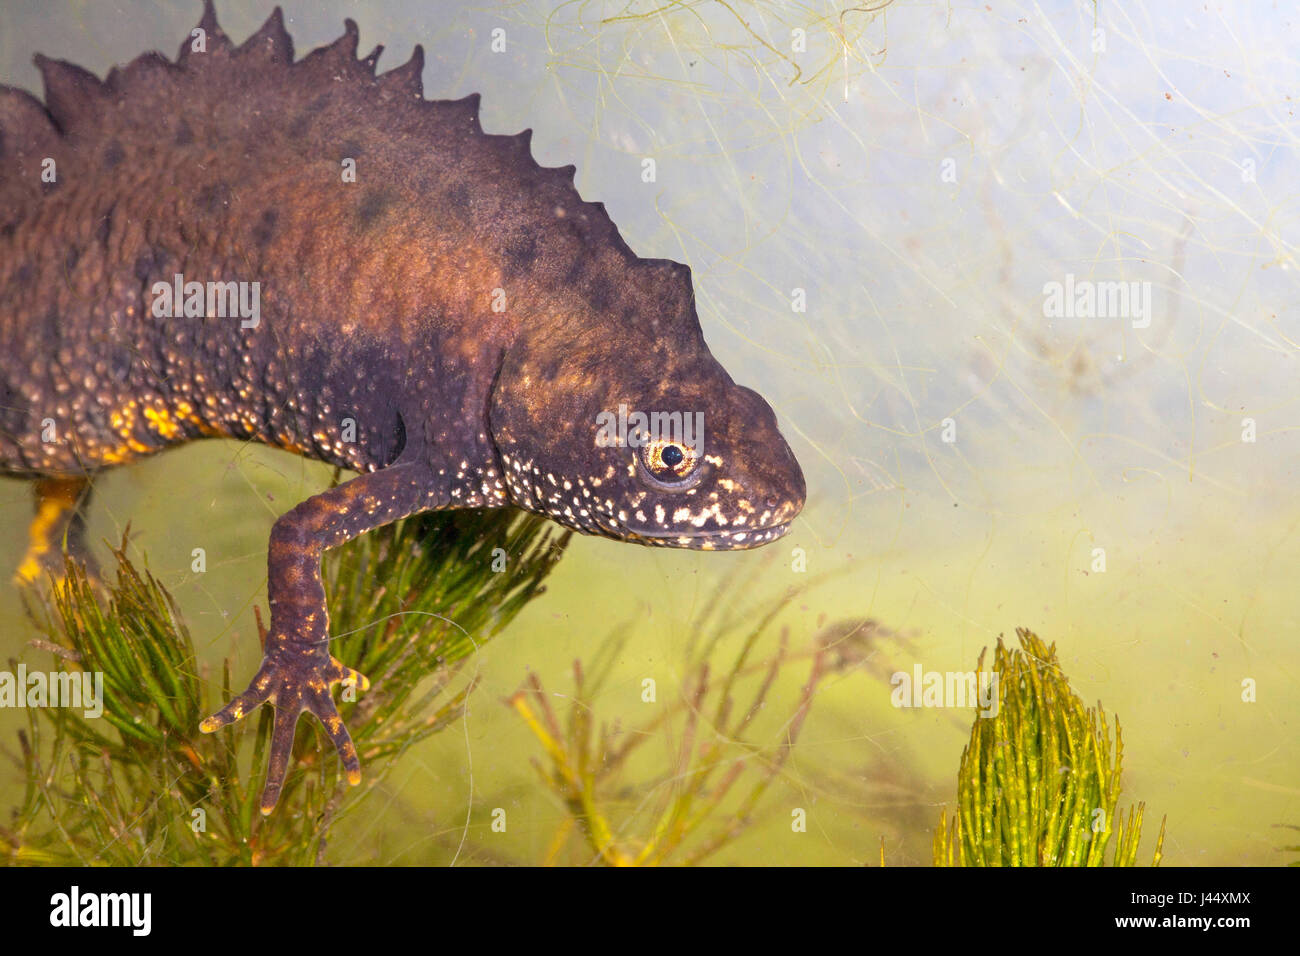 Portrait of a male great crested newt underwater photographed from the side with a green background Stock Photo